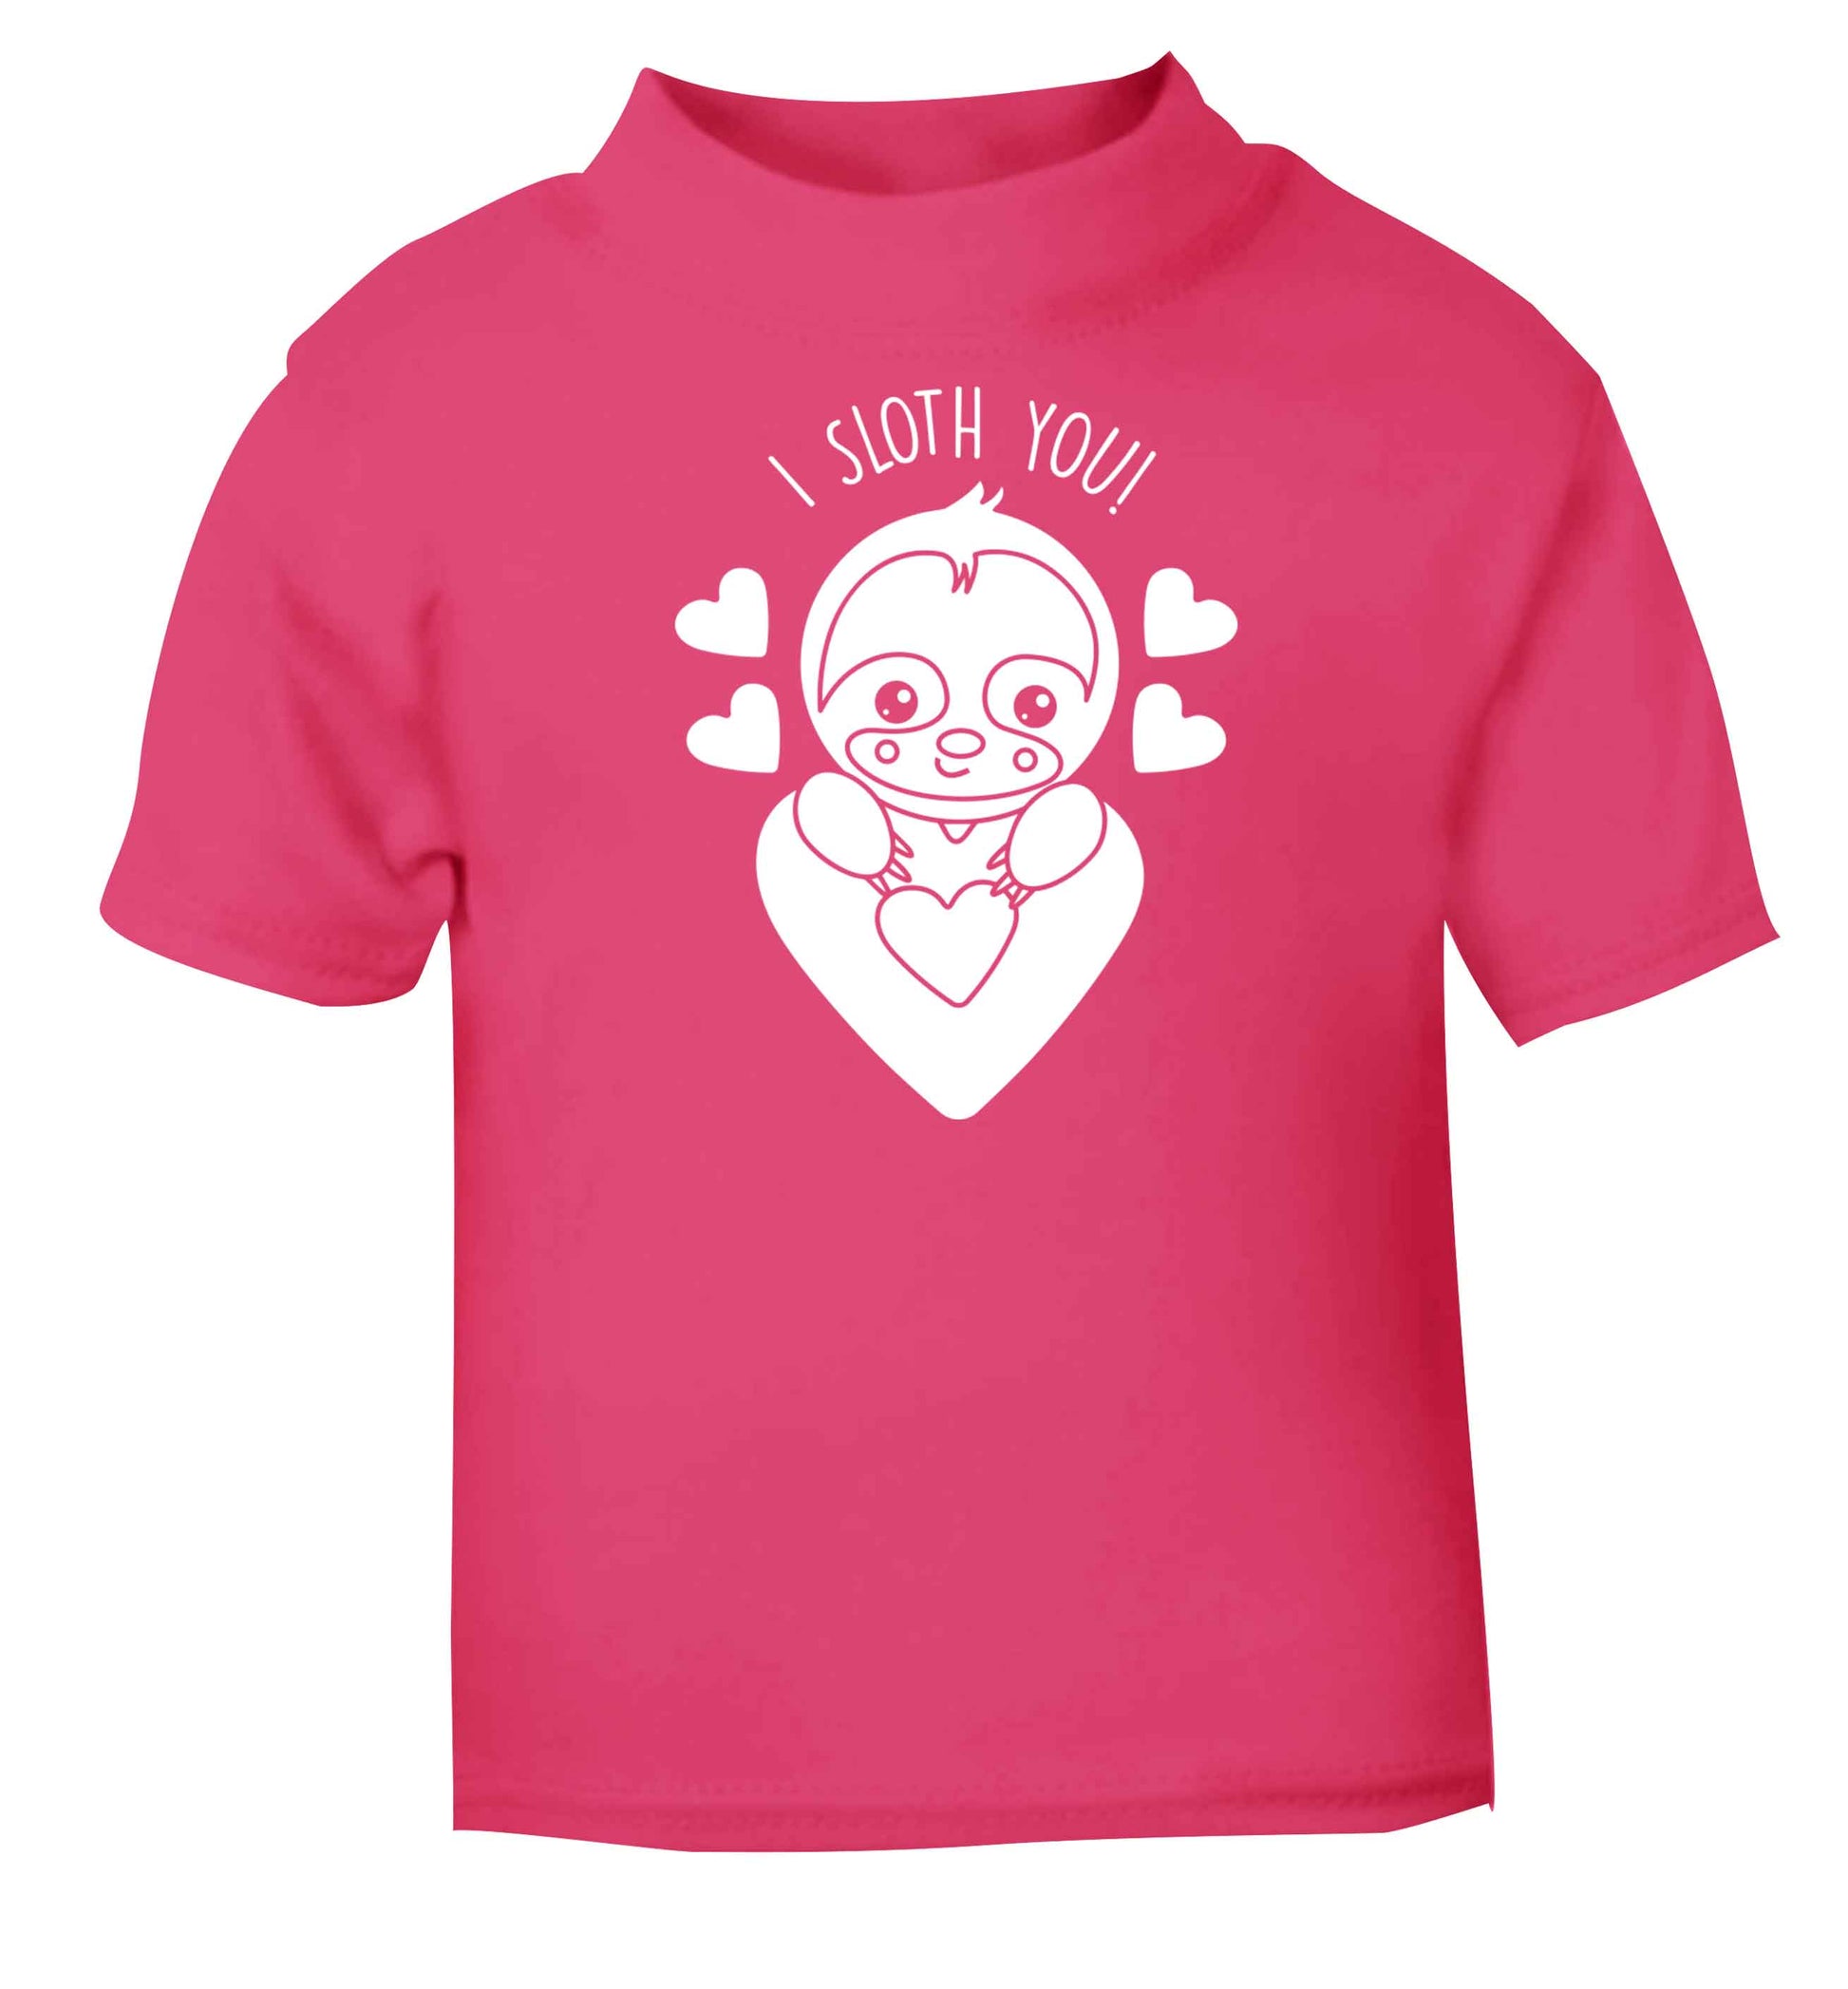 I sloth you pink baby toddler Tshirt 2 Years